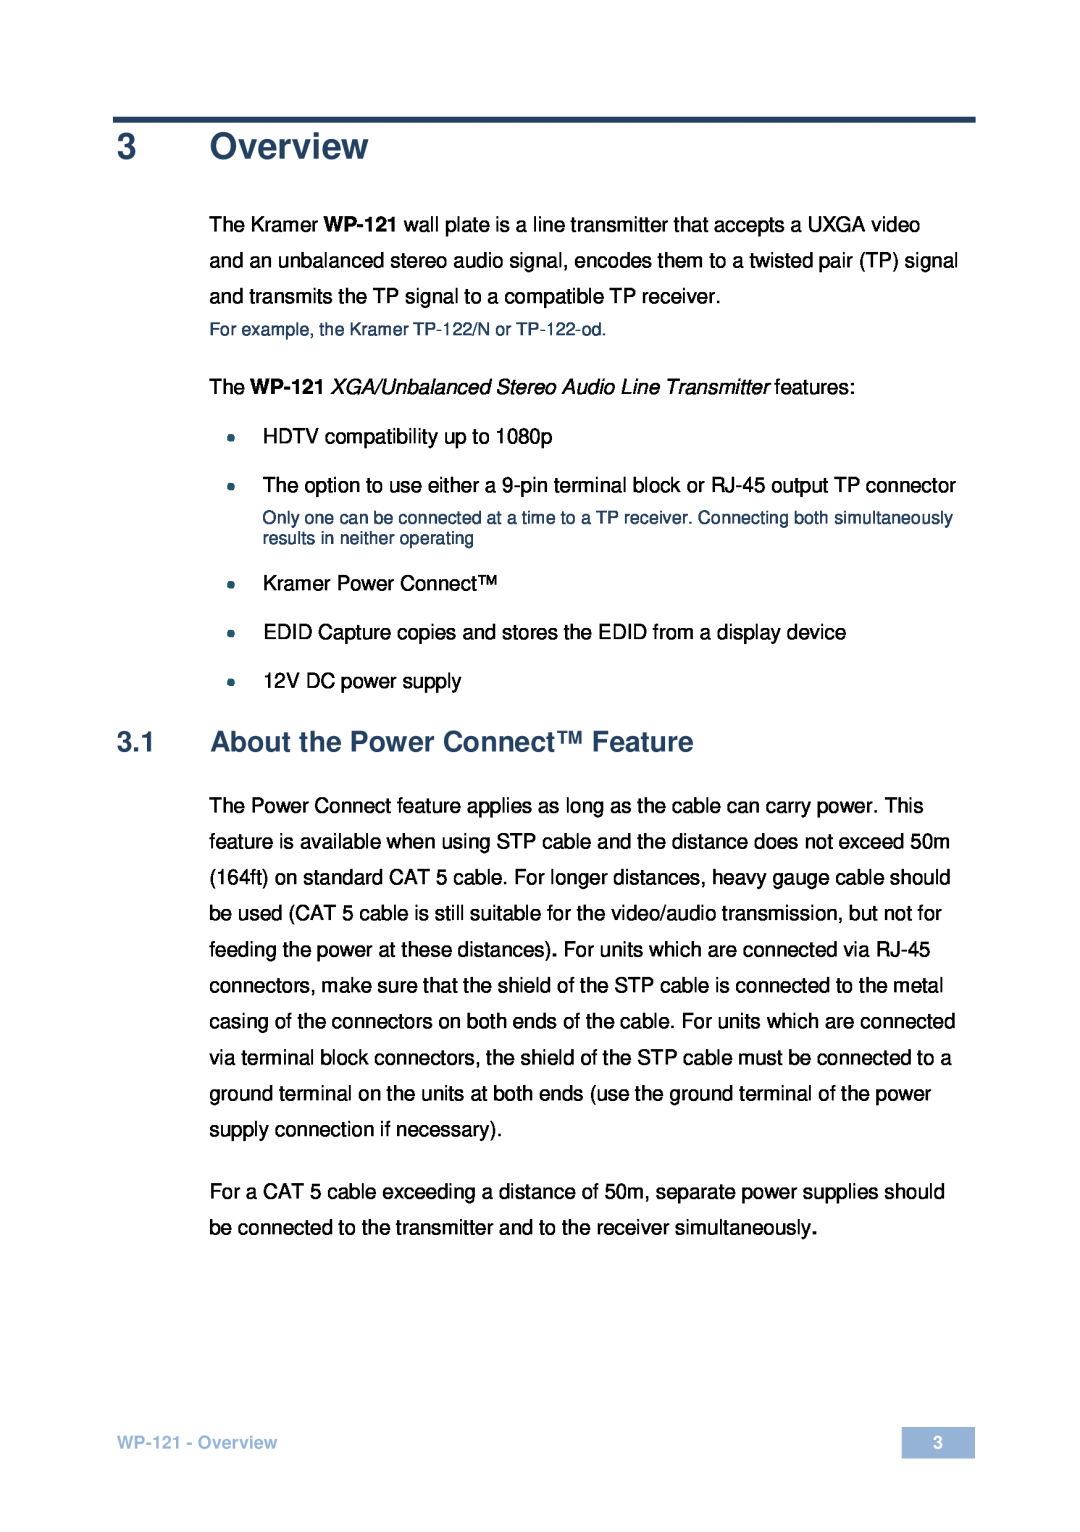 Kramer Electronics WP-121 user manual Overview, 3.1About the Power Connect Feature 